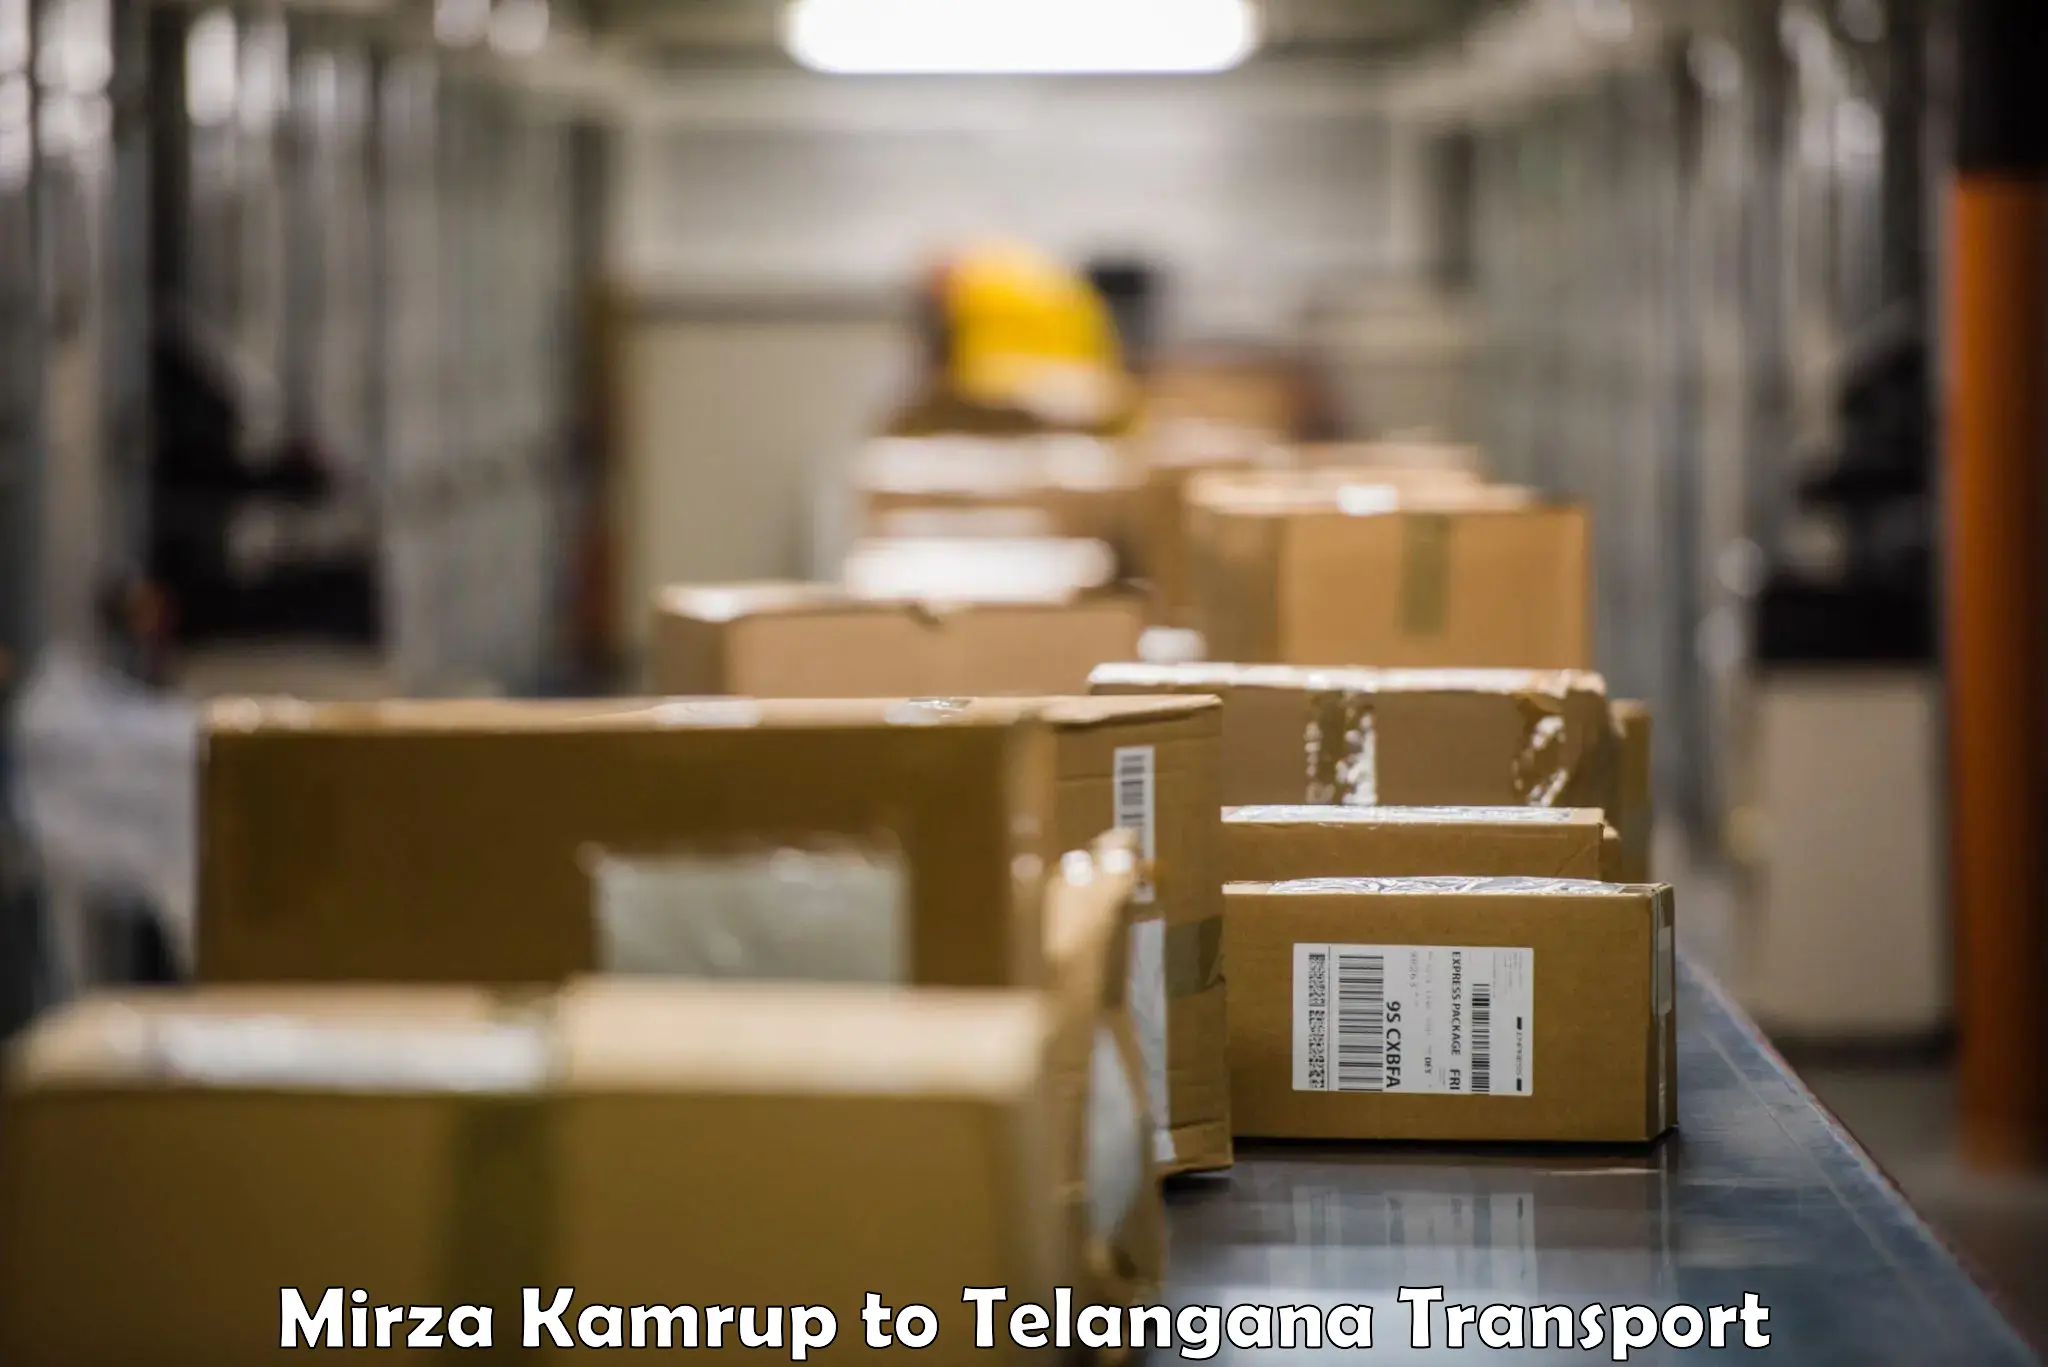 Commercial transport service Mirza Kamrup to Hyderabad